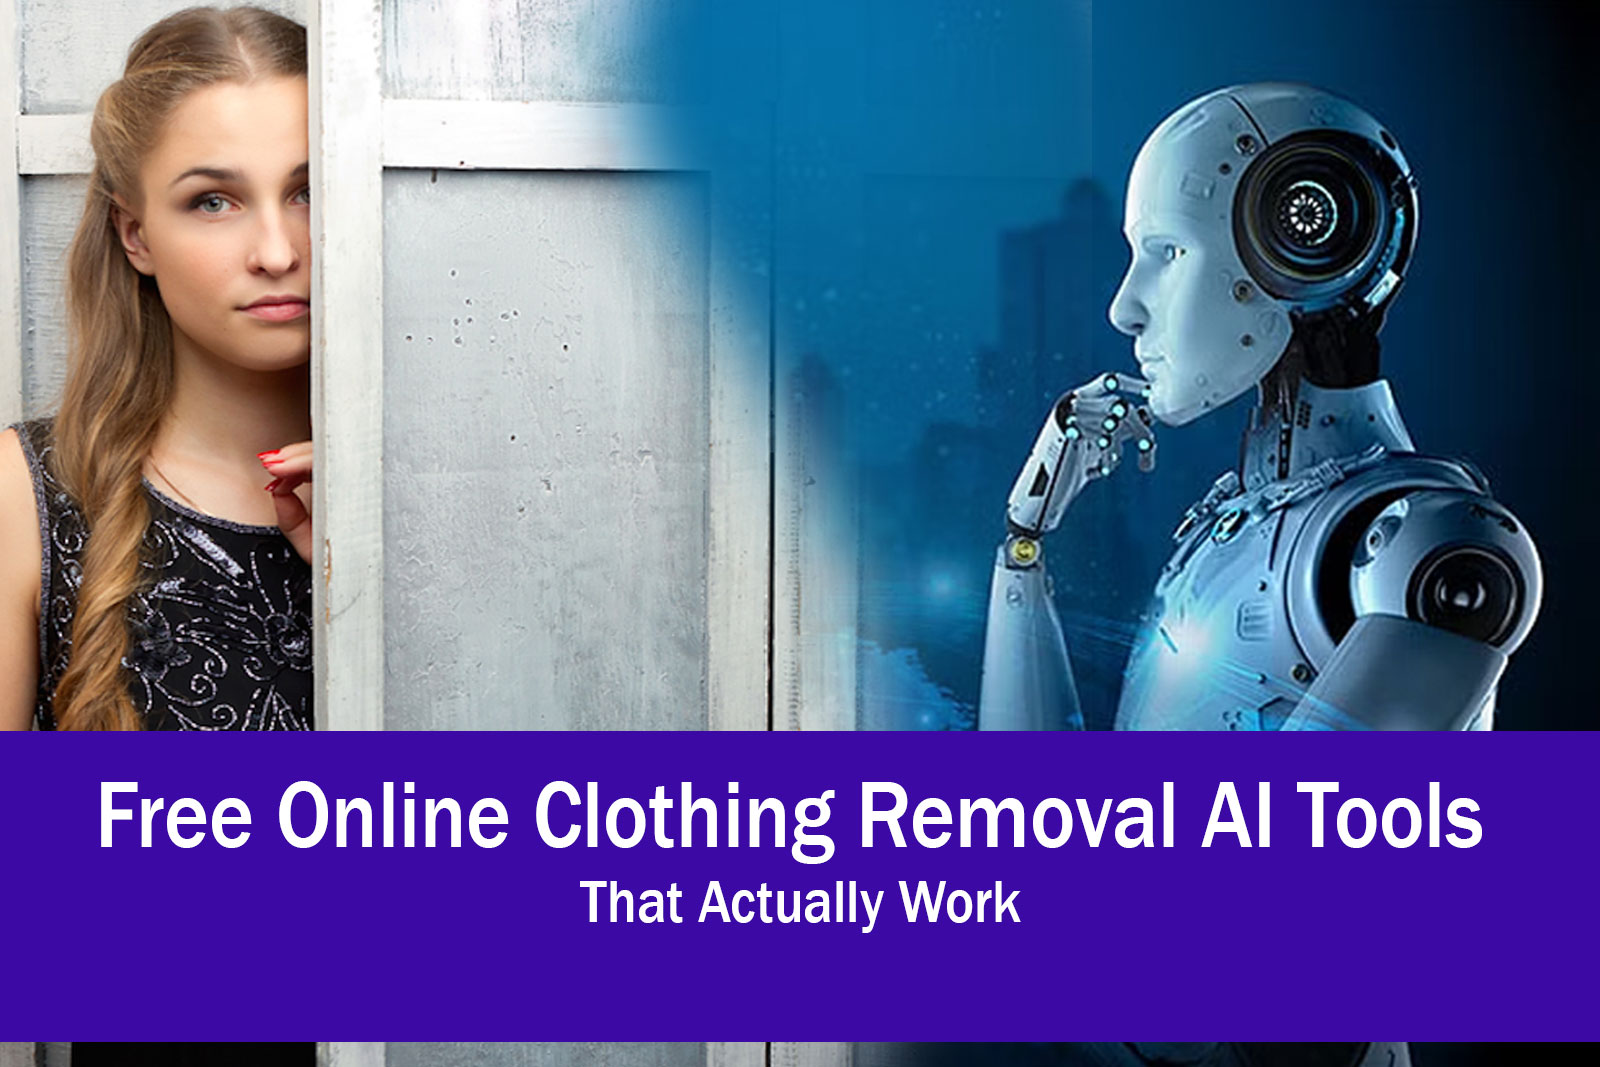 Free Online Clothing Removal AI Tools That Actually Work